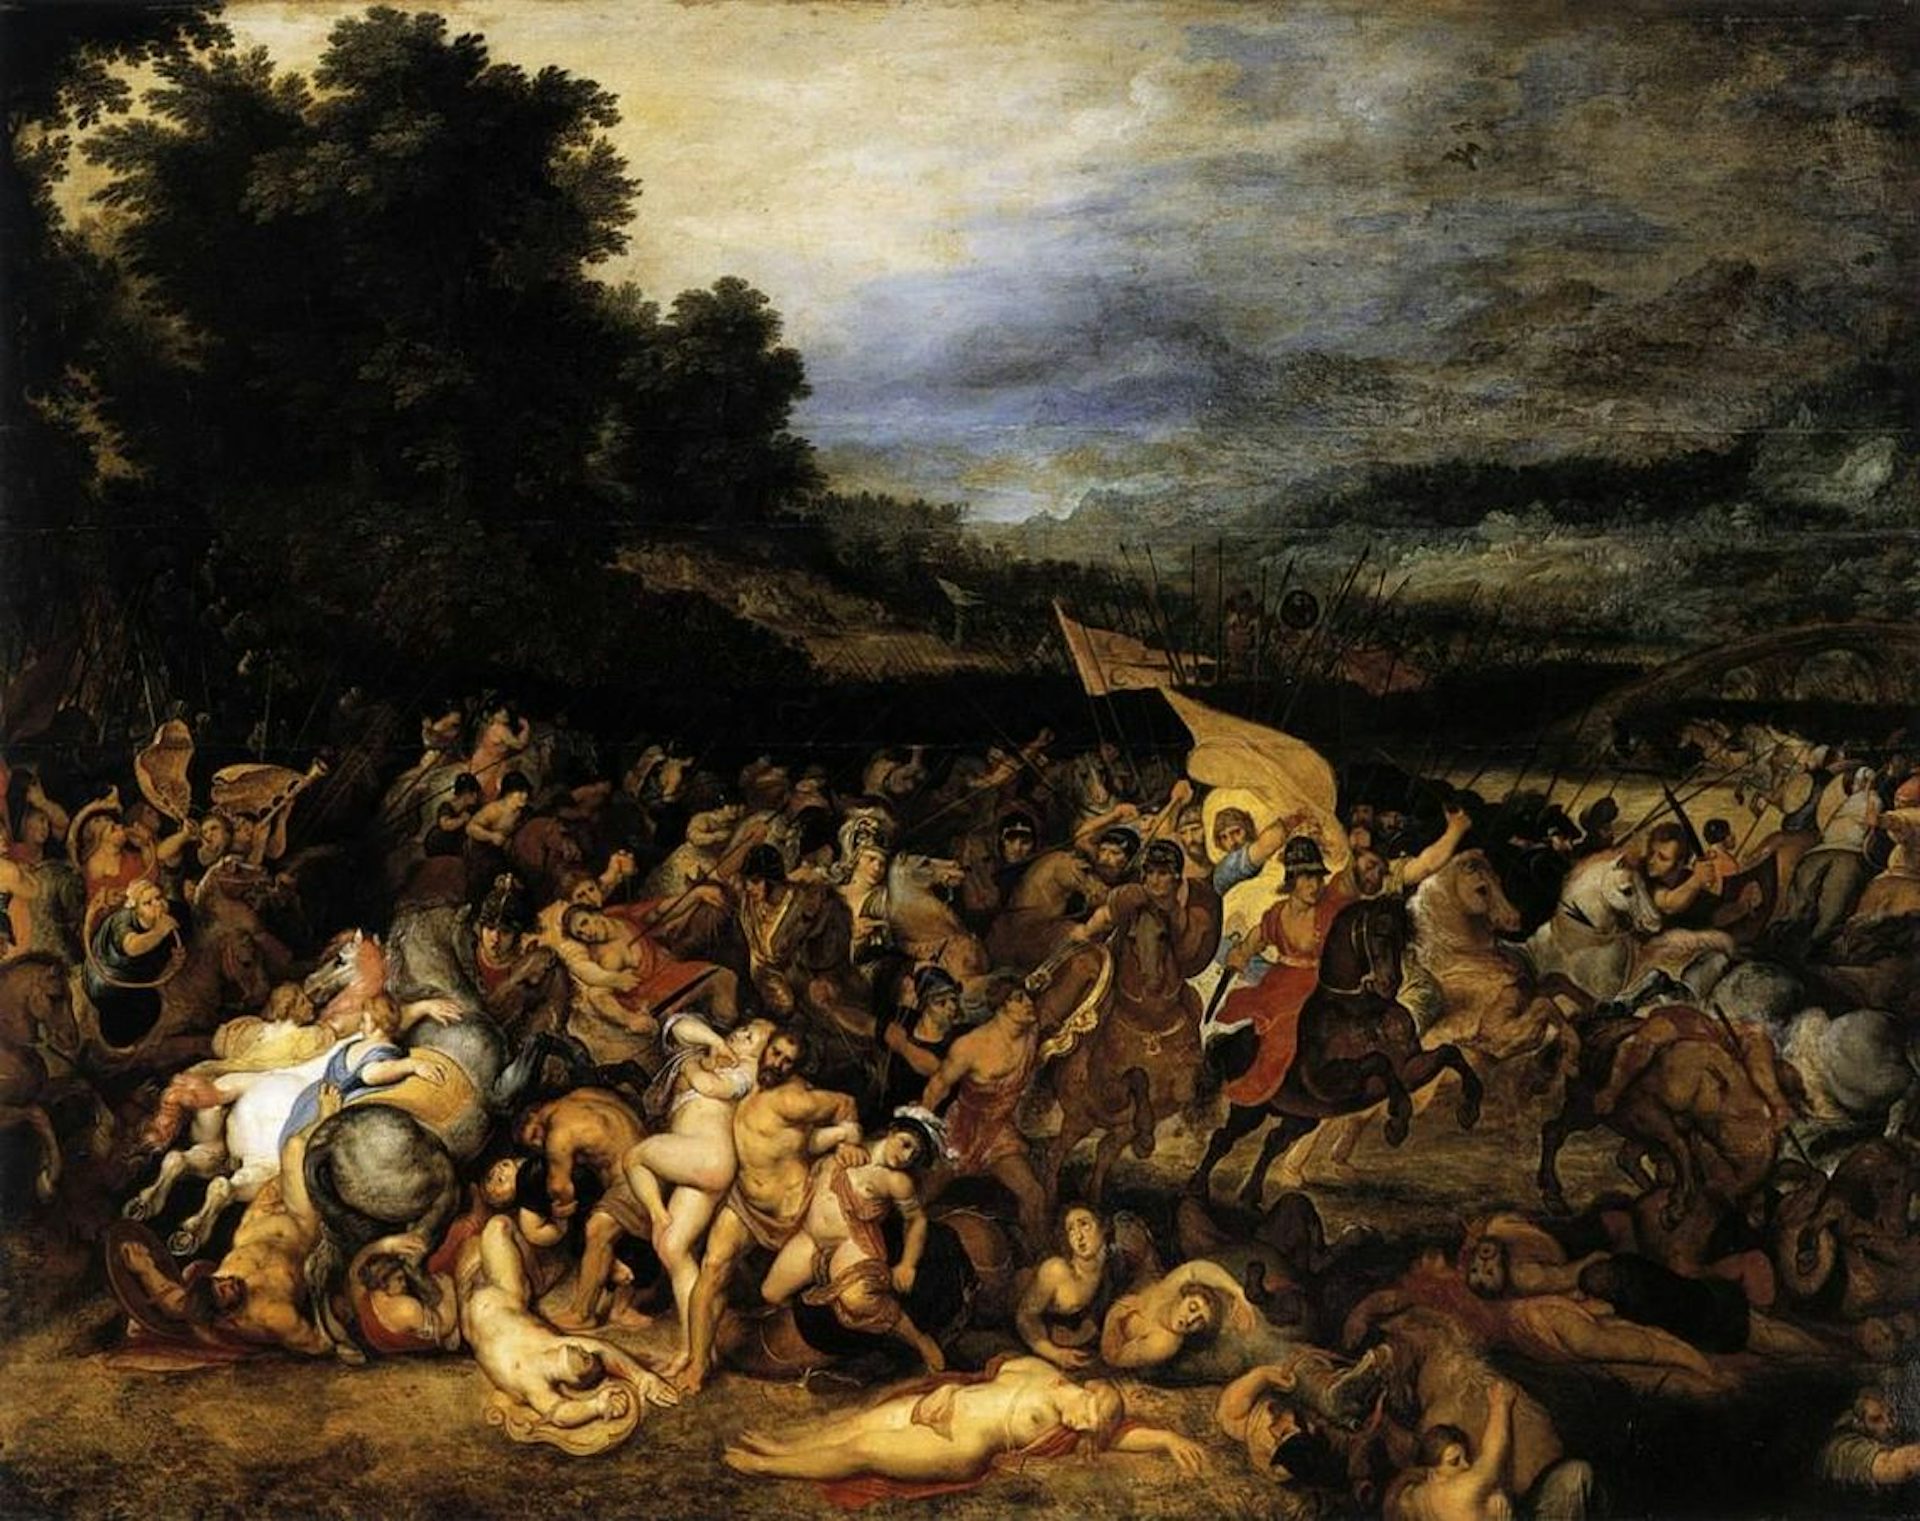 Peter Paul Rubens - The Battle of the Amazons